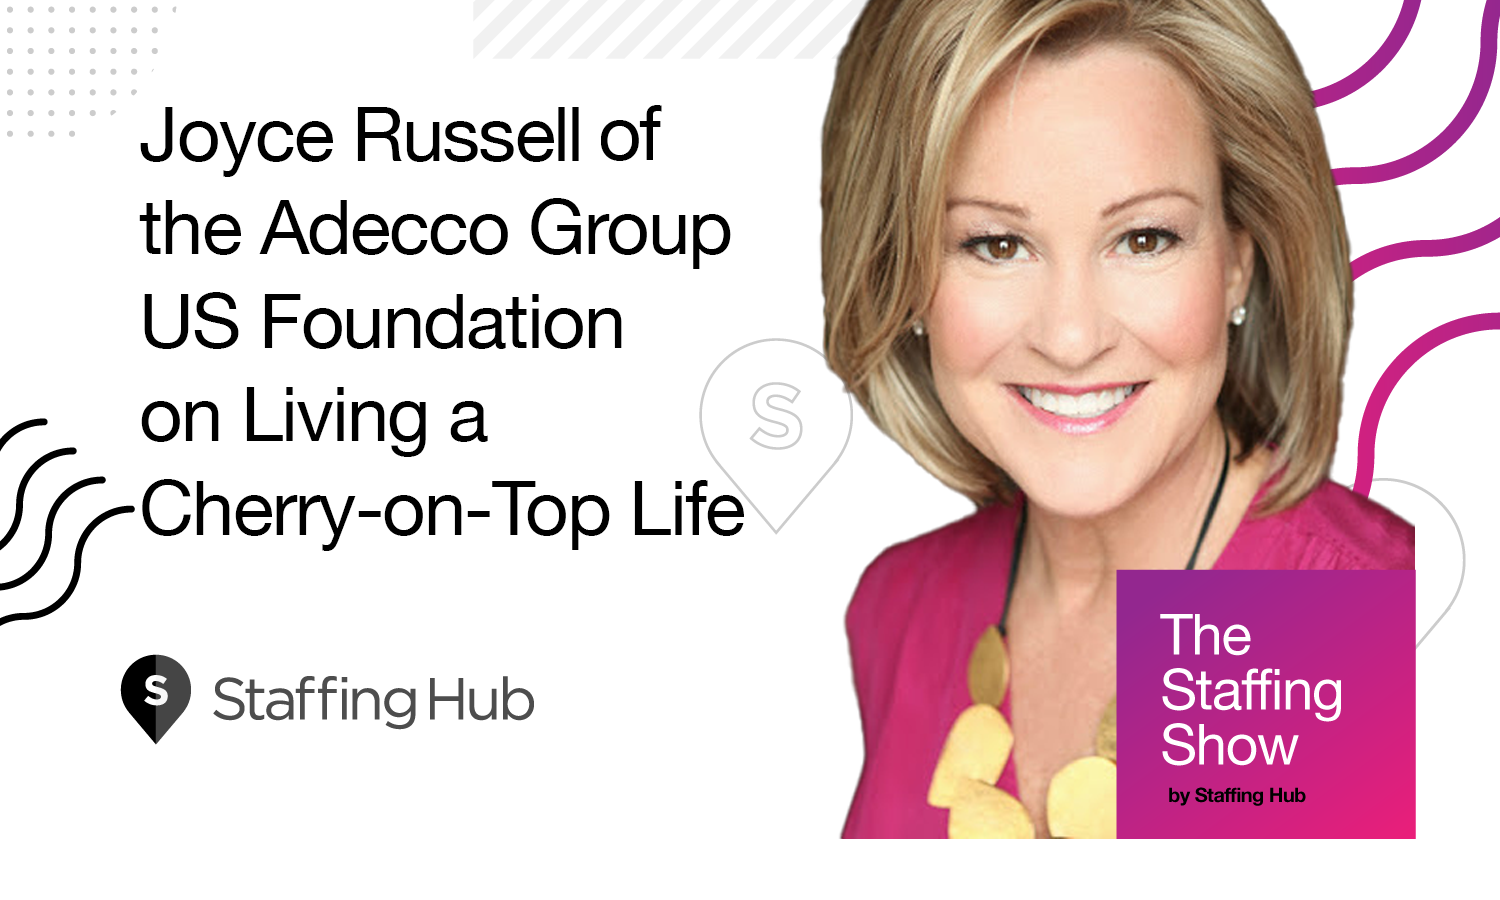 Joyce Russell of the Adecco Group US Foundation on How to Live a Cherry-on-Top Life